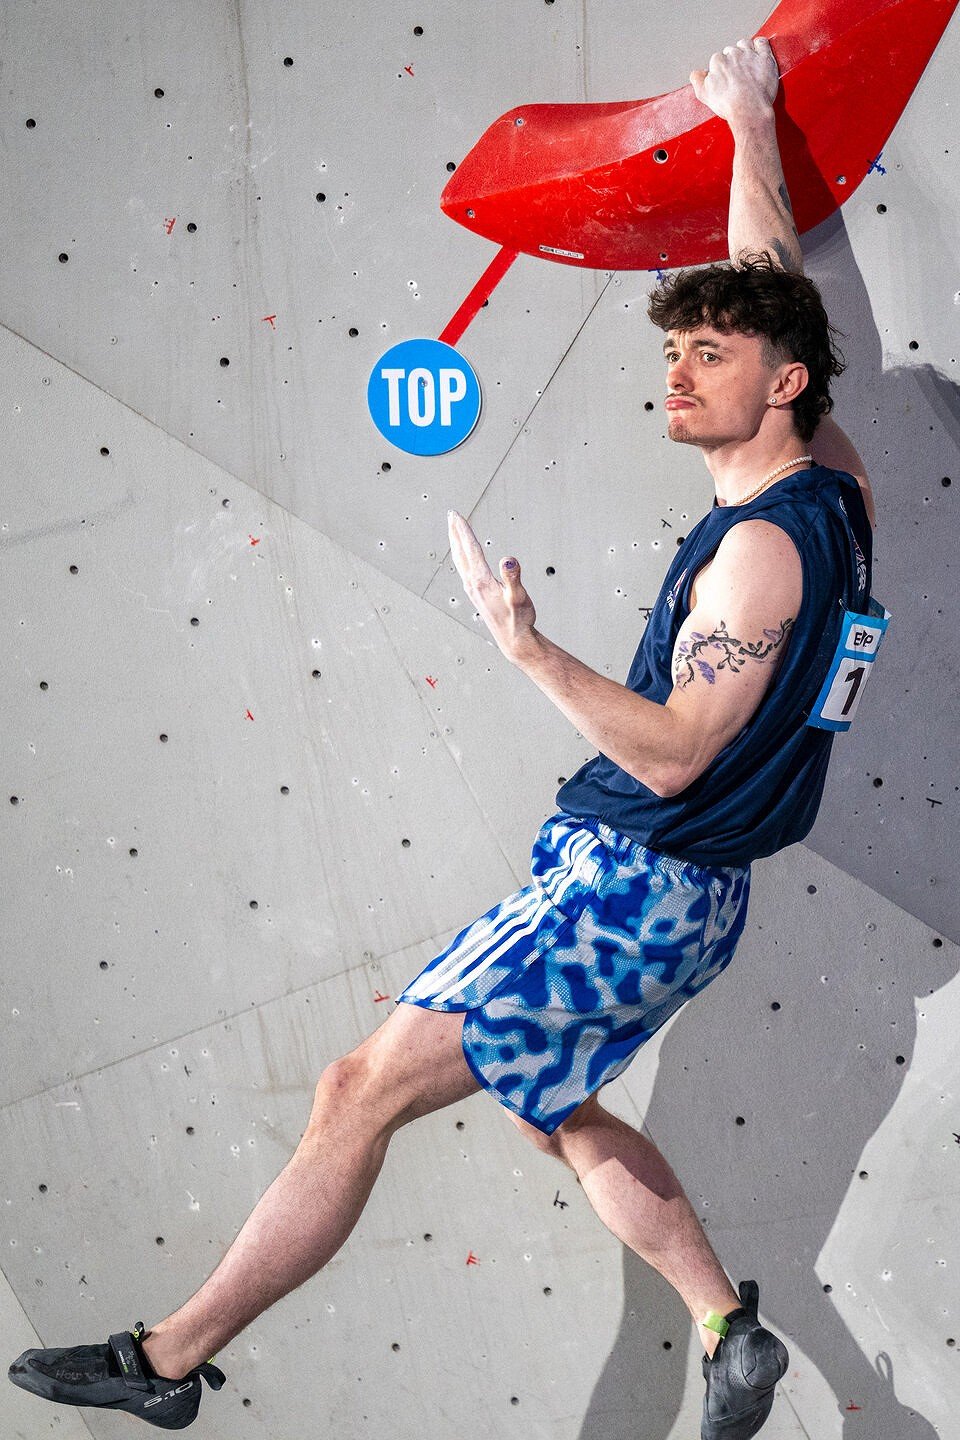 Max Milne (GBR) on form in Keqiao.  © IFSC